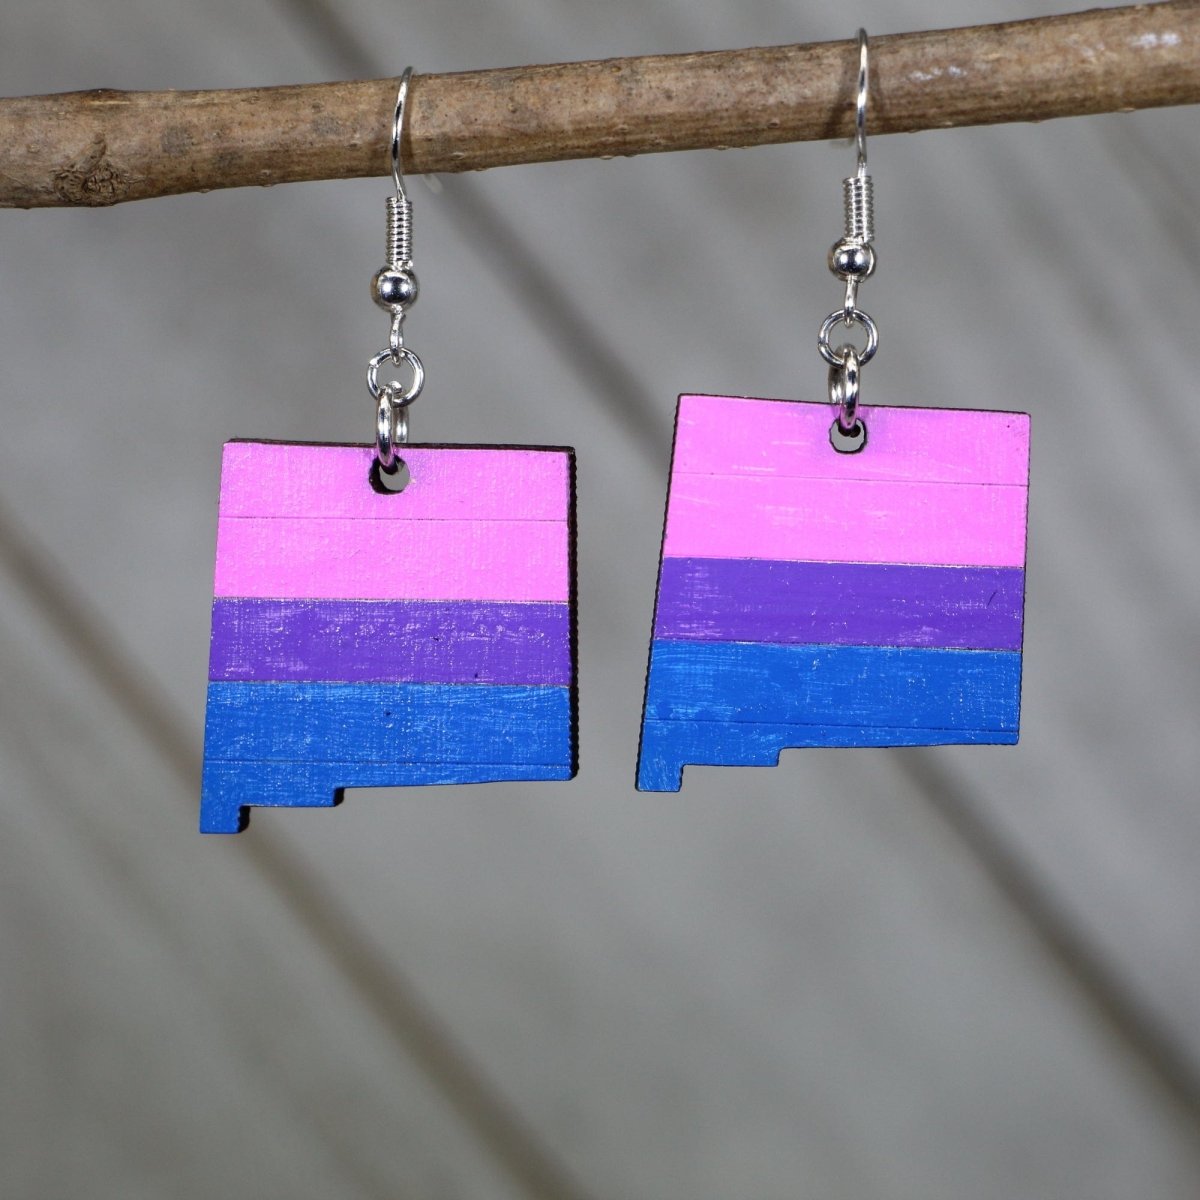 LGBTQIA+ New Mexico Bisexual Flag Wooden Dangle Earrings - - Cate's Concepts, LLC